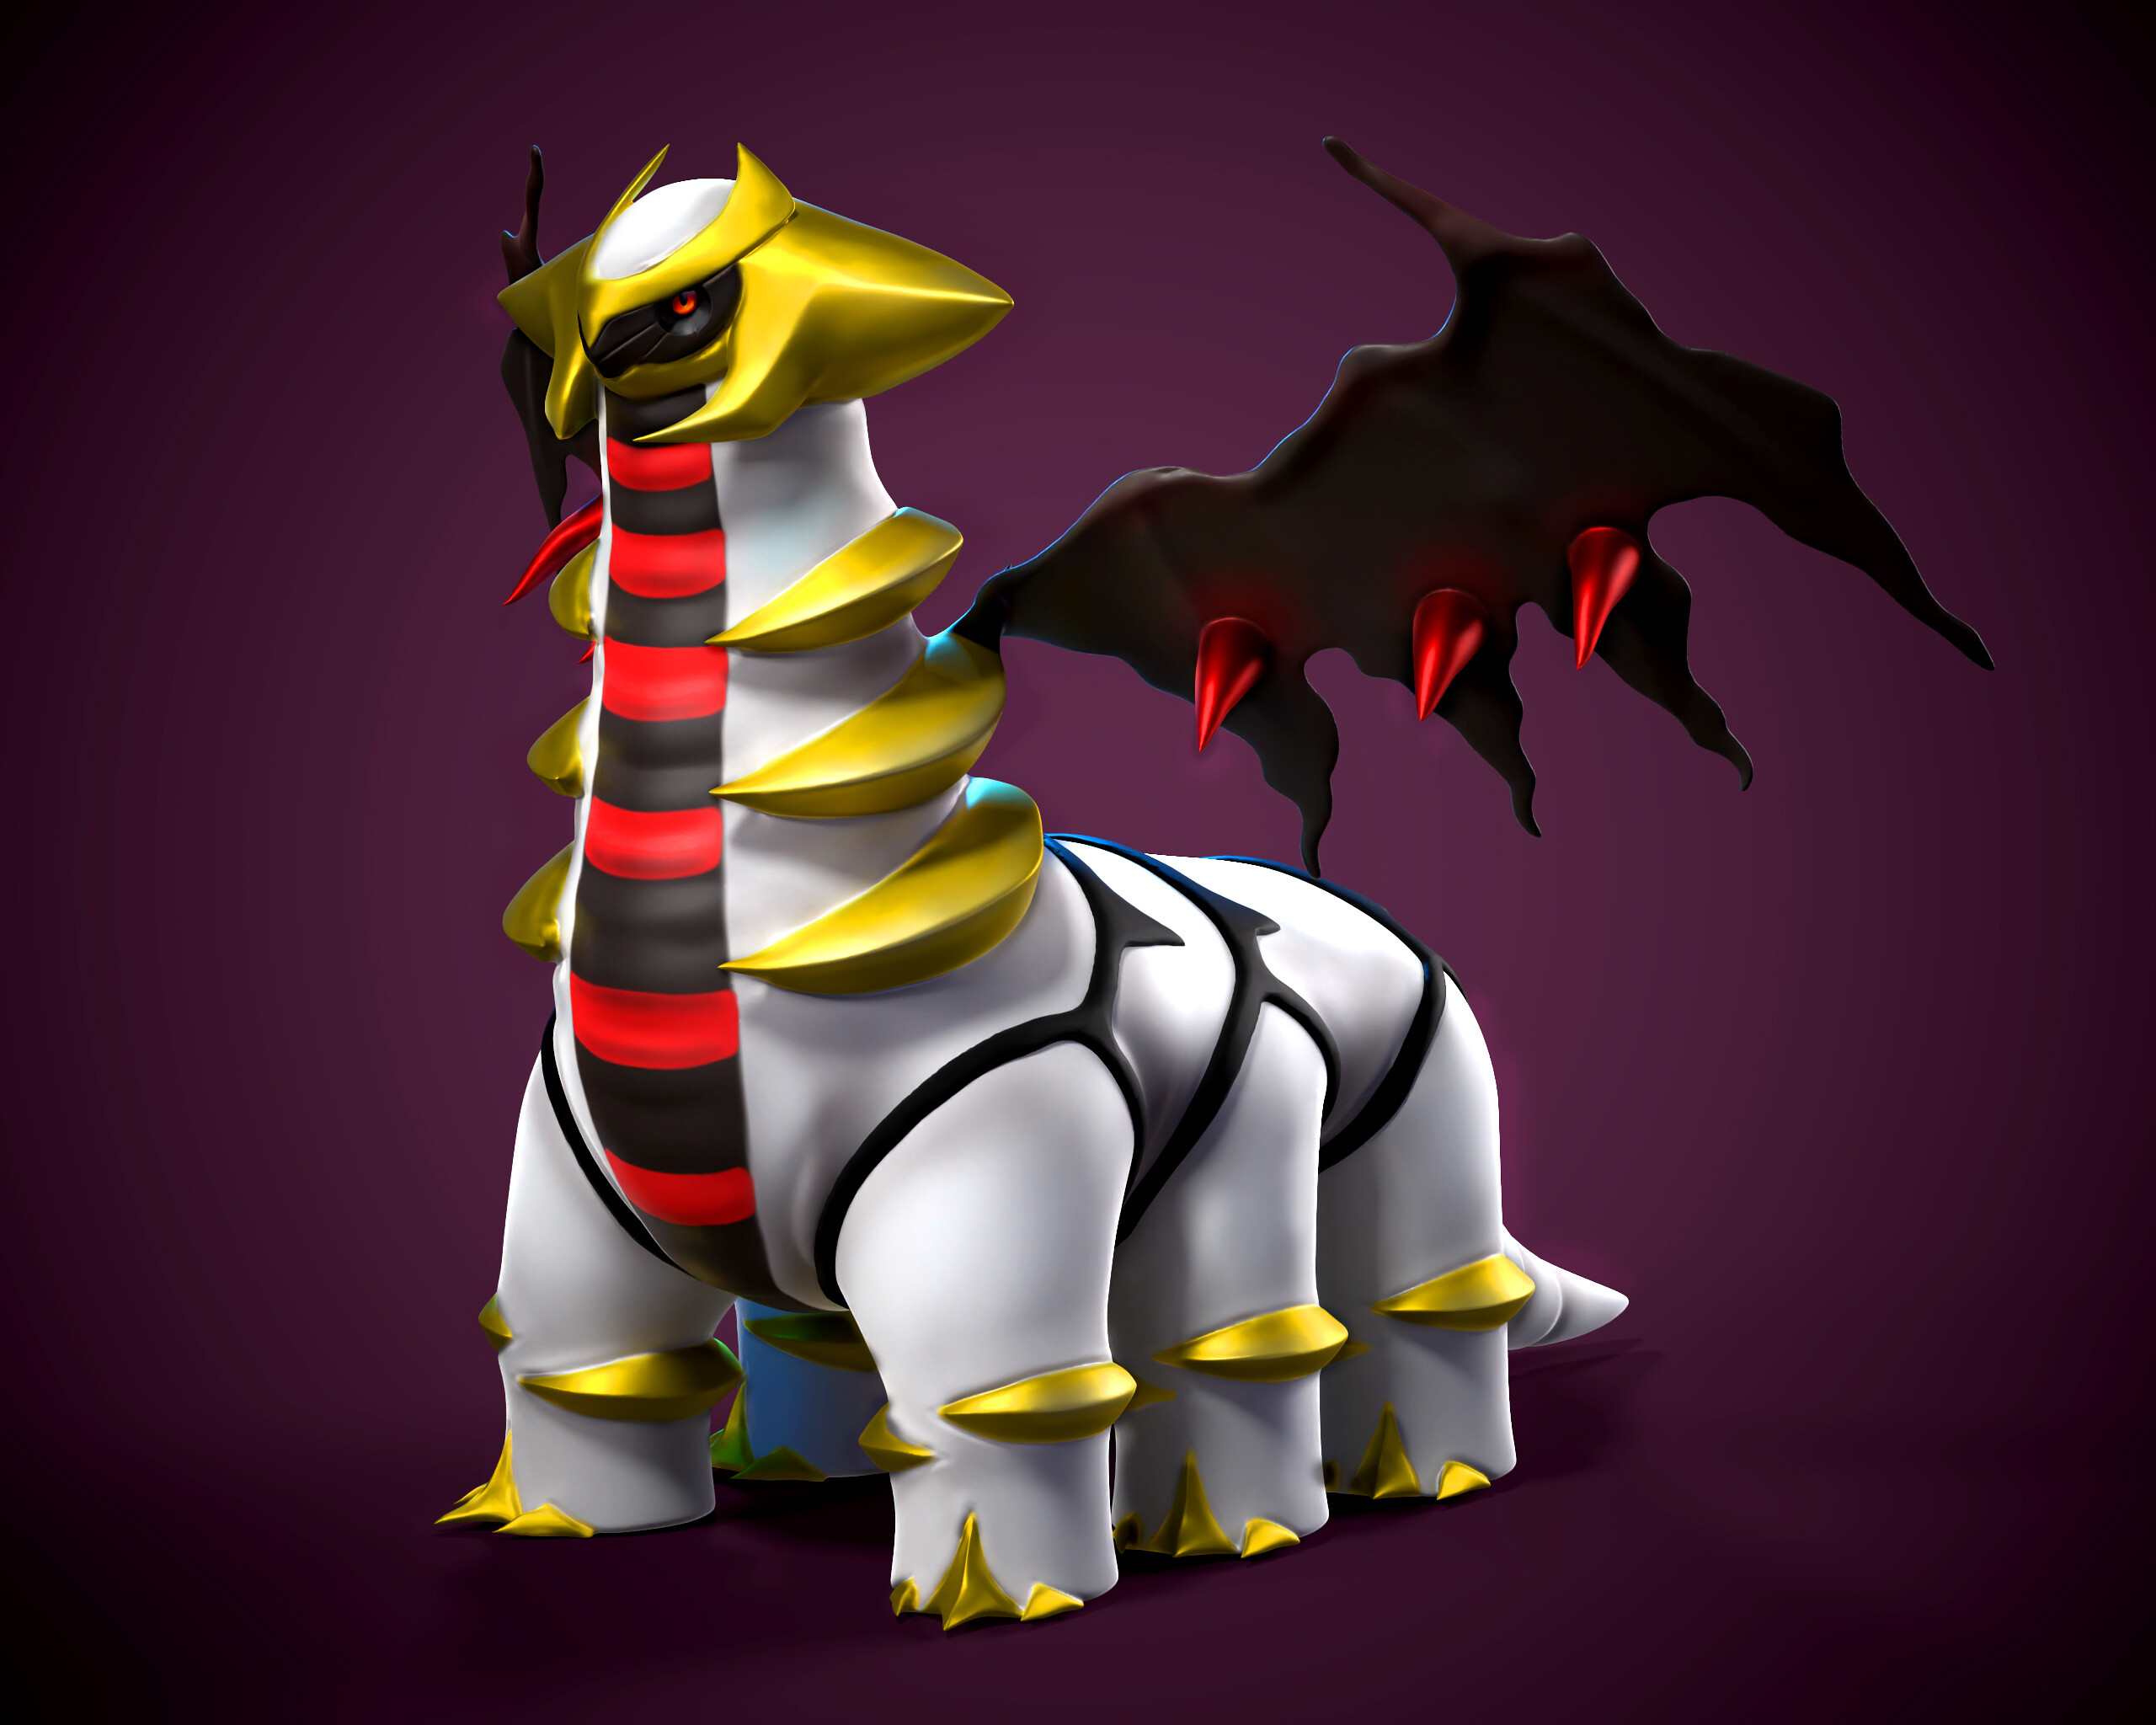 Giratina: A gold crown-like object on the head, Two large horns pointing sideway, Two large black ghostly wings. 2560x2050 HD Wallpaper.